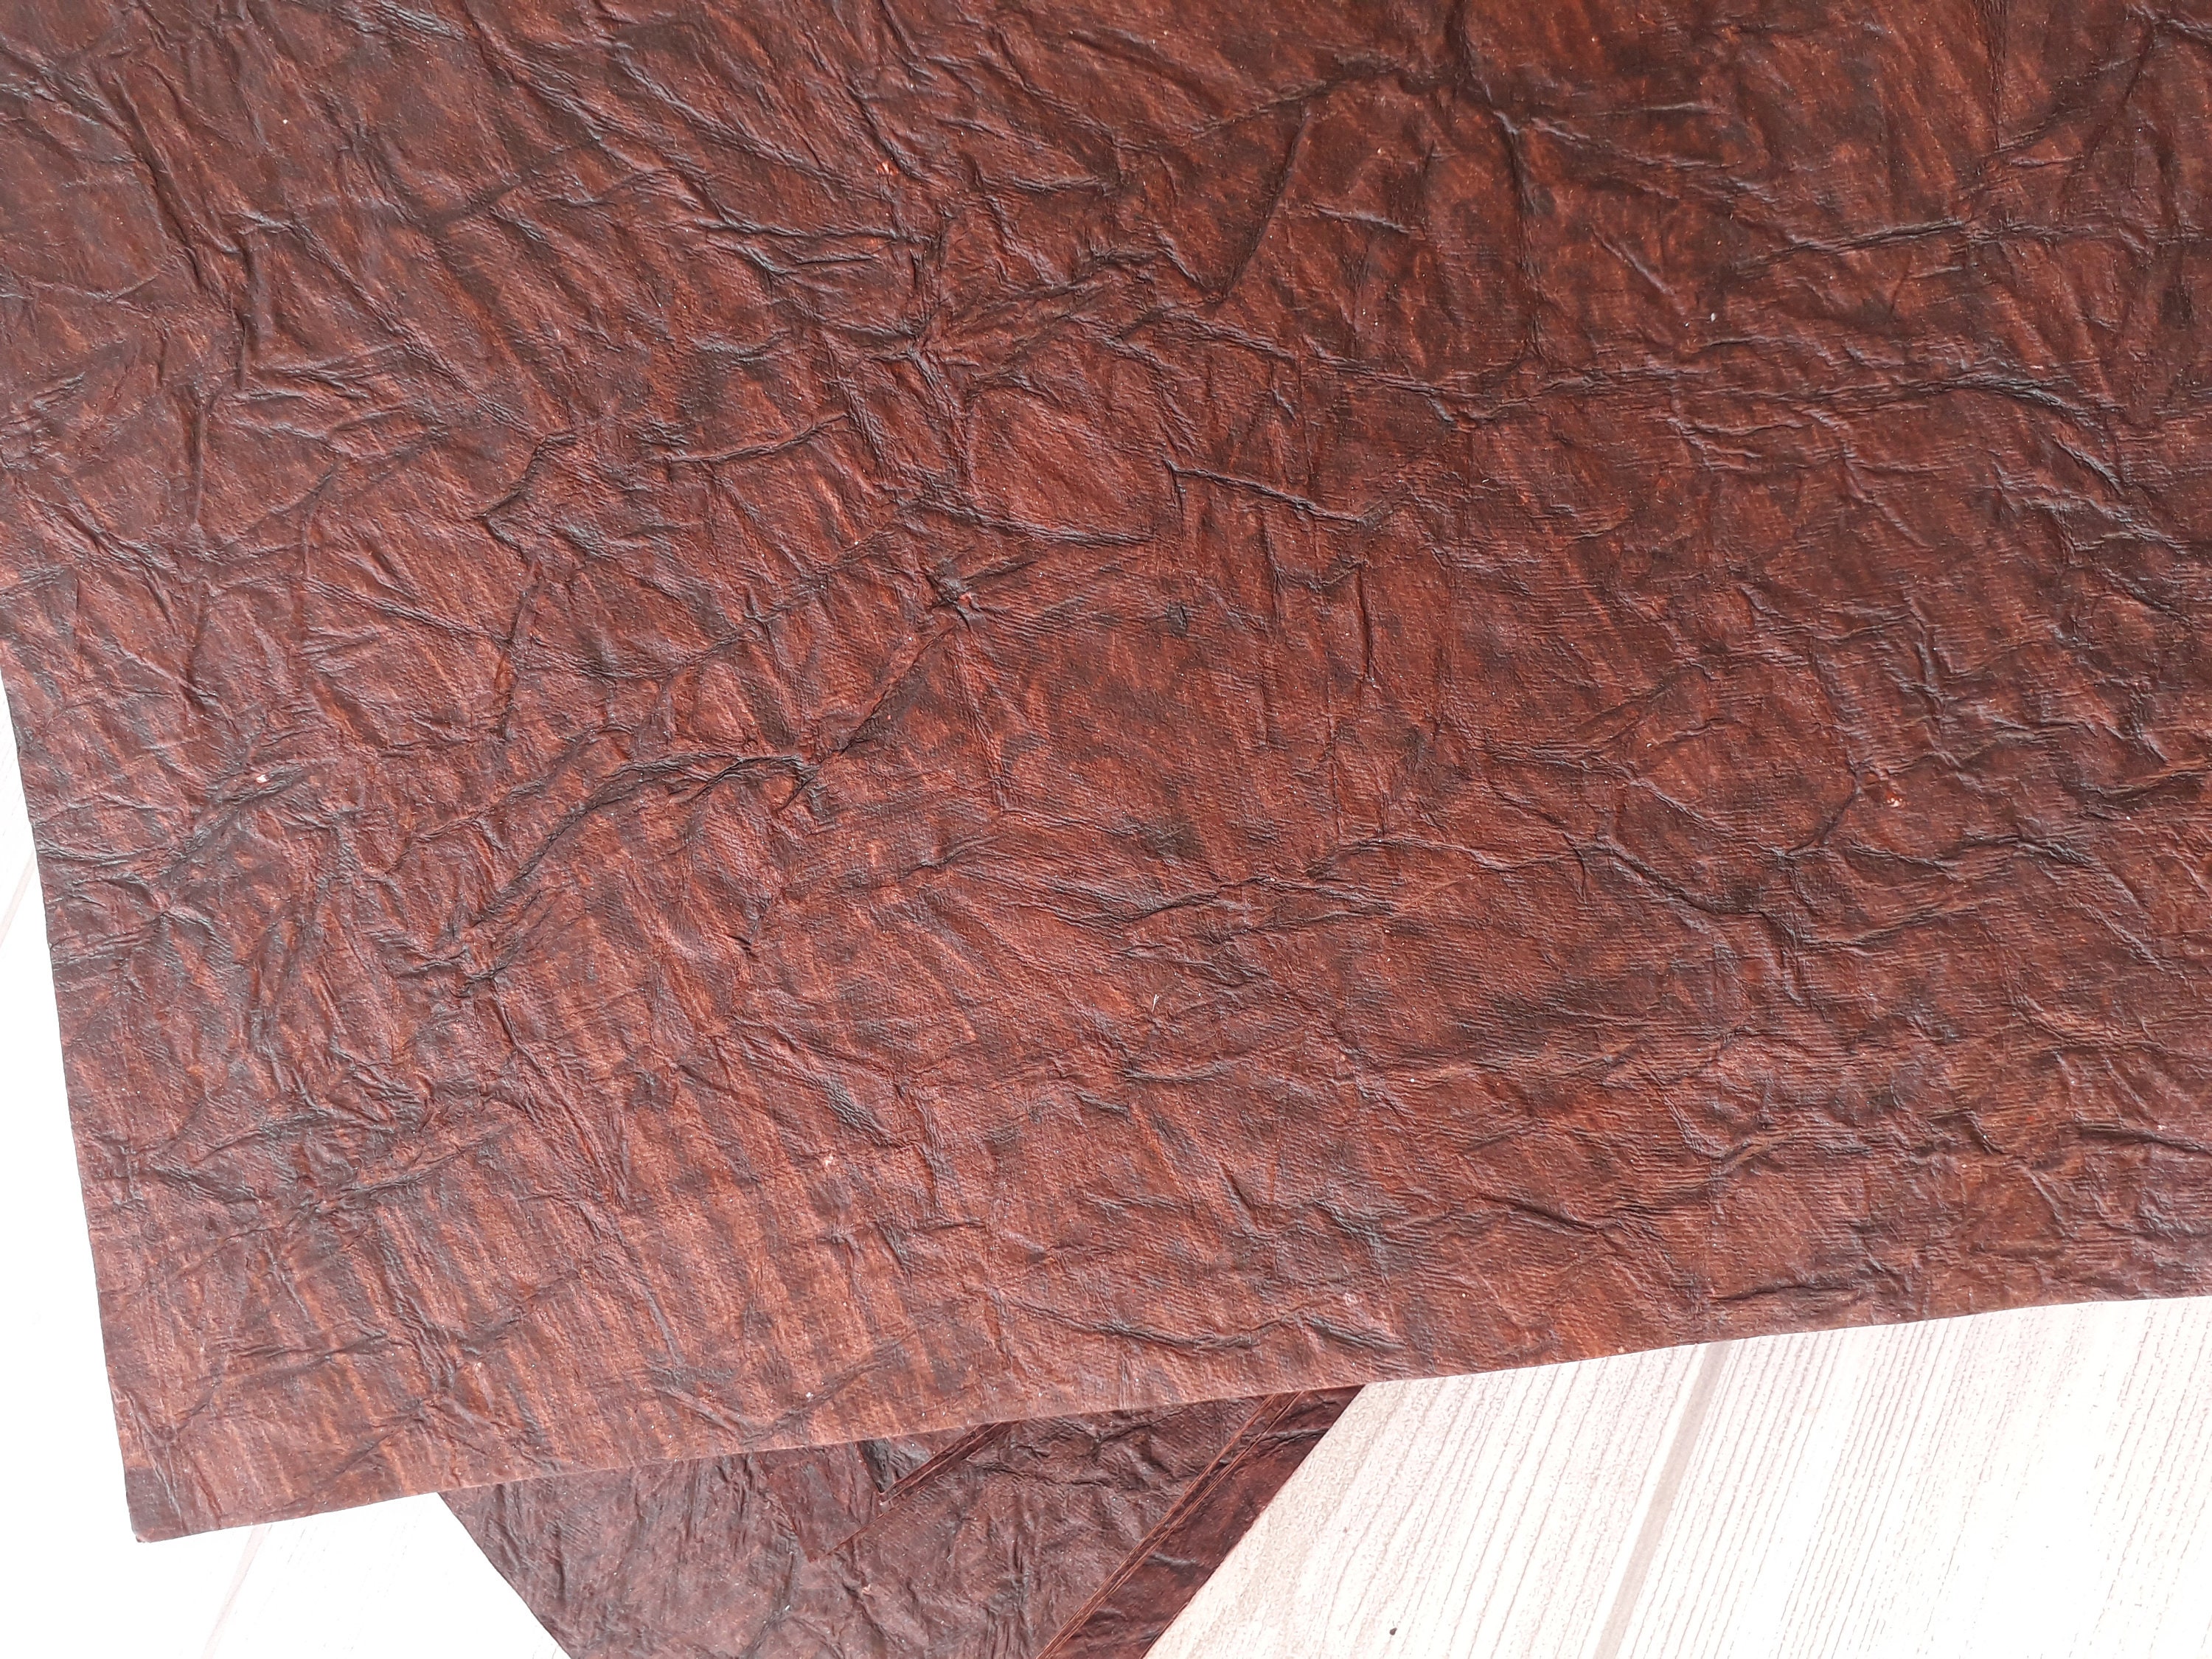 Wrinkled Texture Handmade Paper/ 220 gsm A4 100% Cotton rag Brown  paper/Decorative handmade paper/ eco friendly papers for craft card making